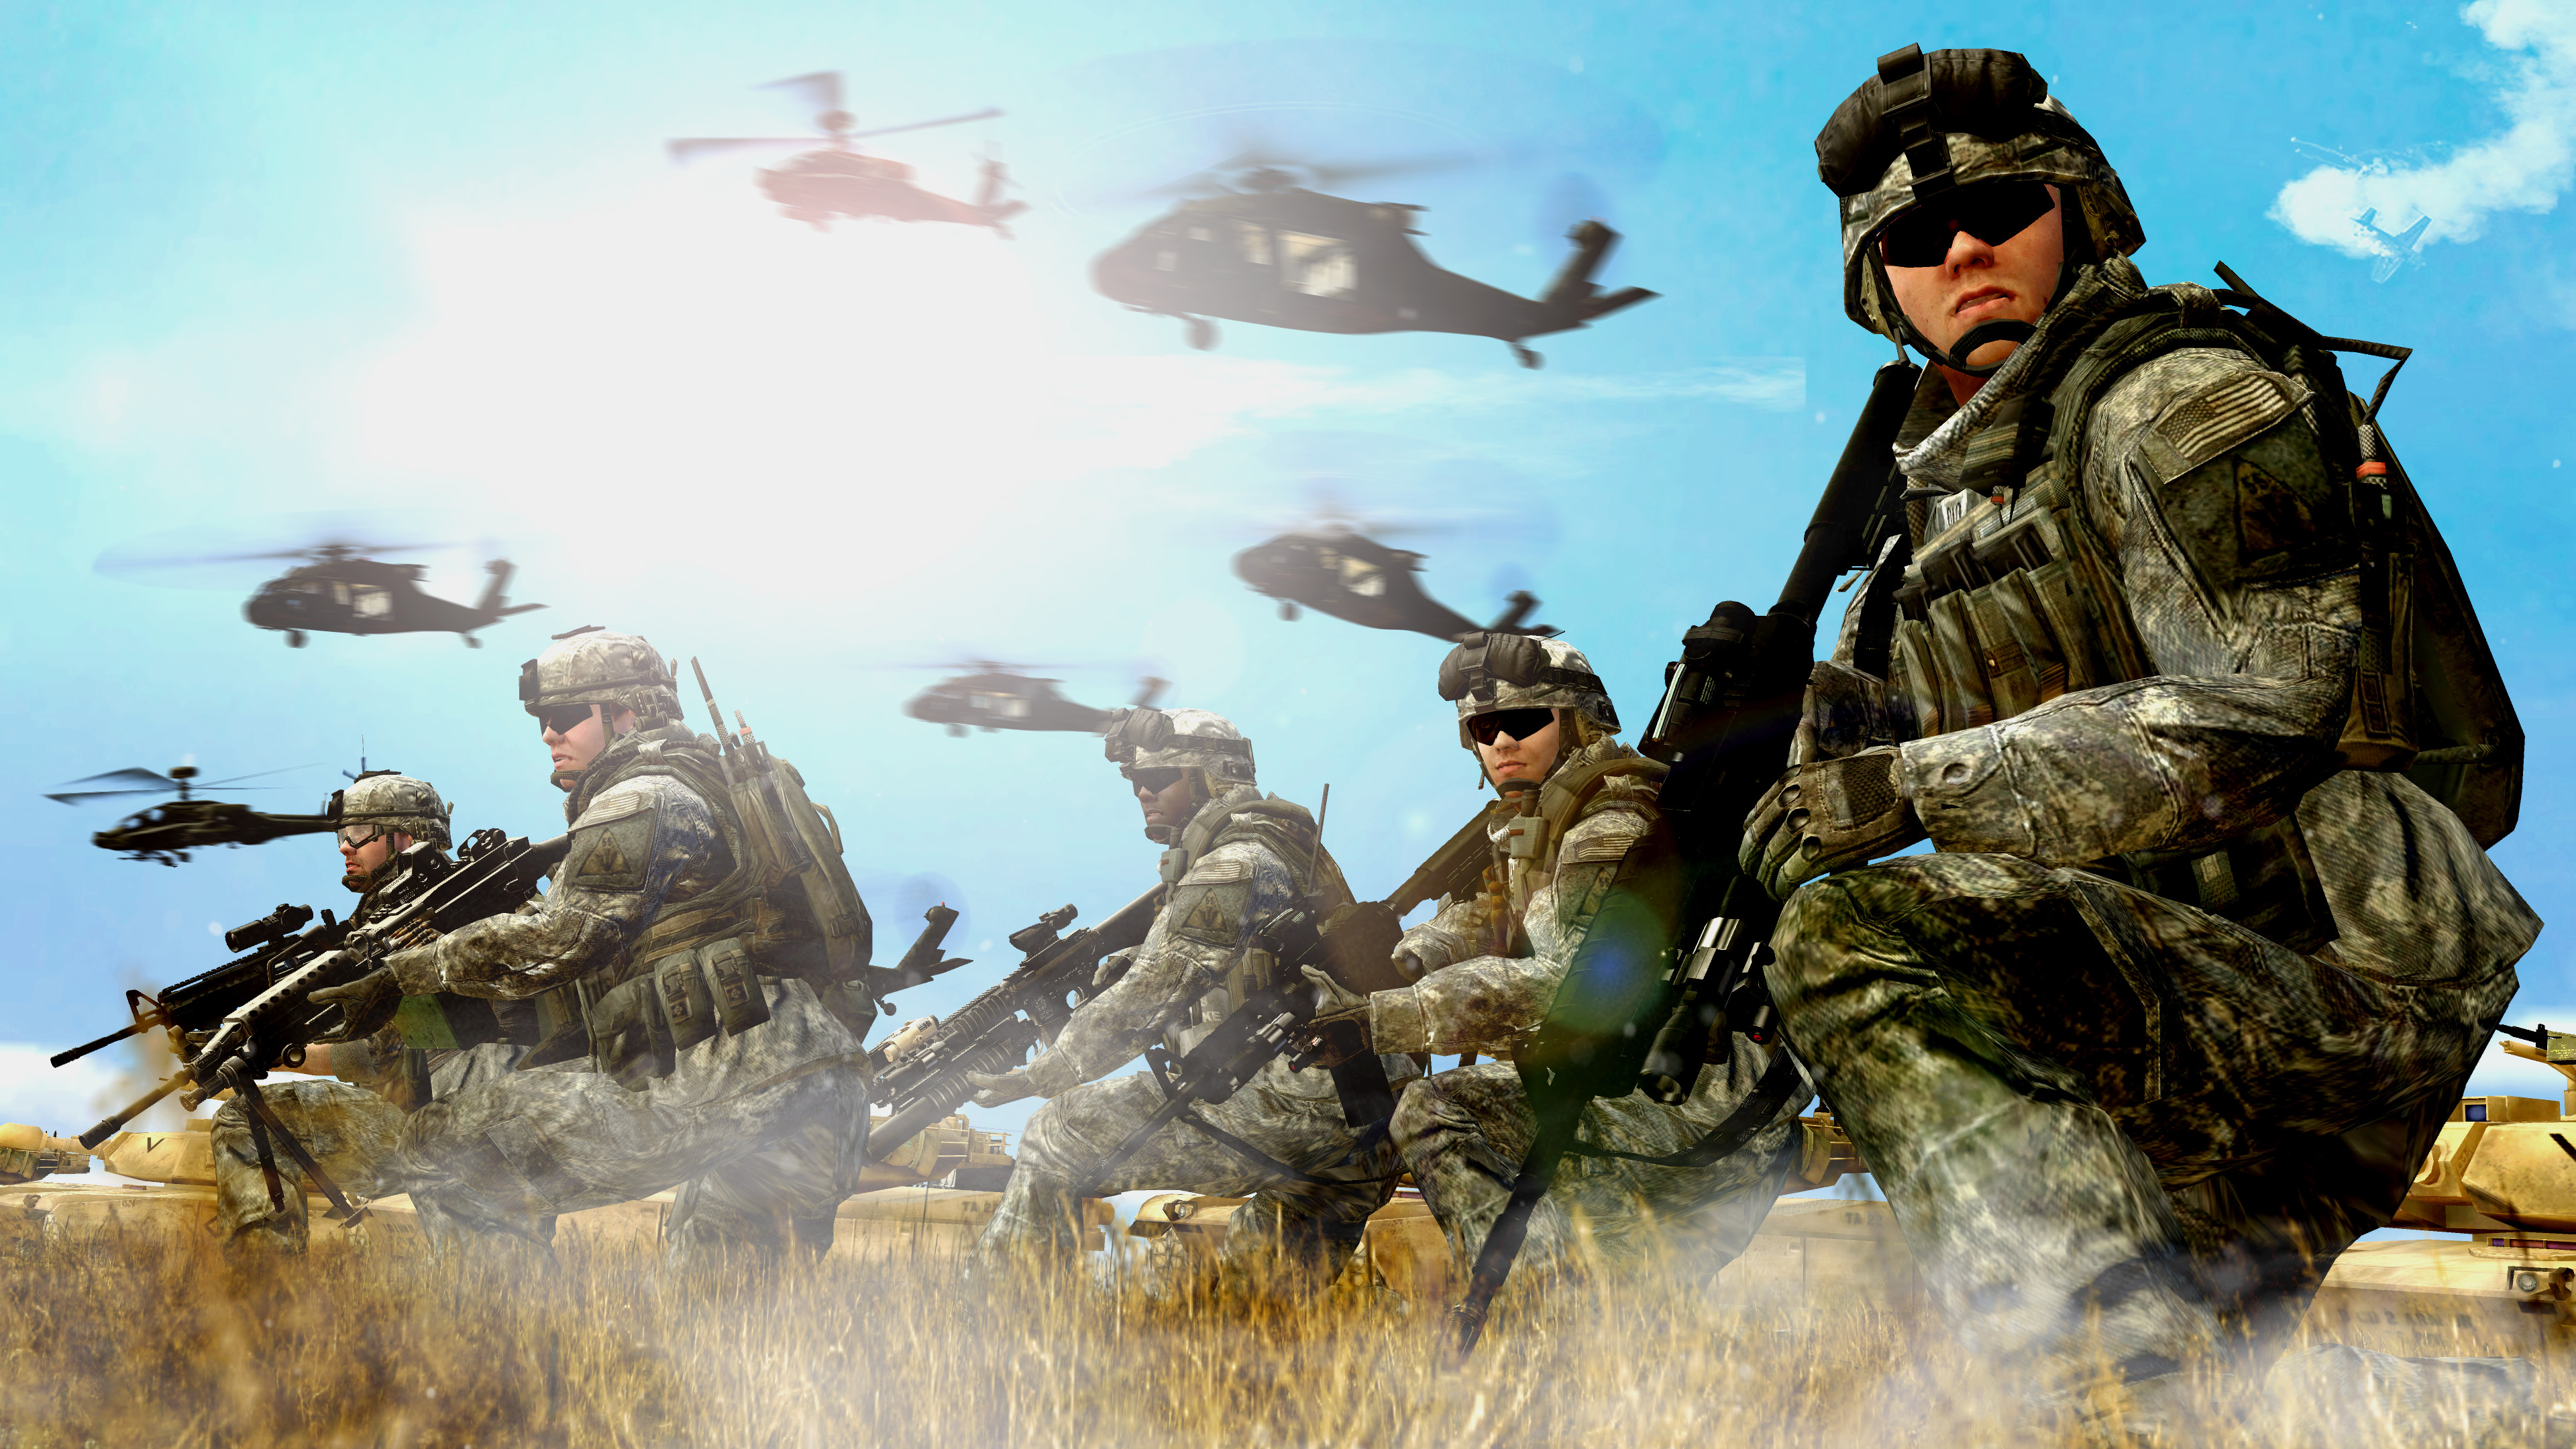 United States Army Rangers Wallpaper (61+ images) Army Rangers Wallpaper.